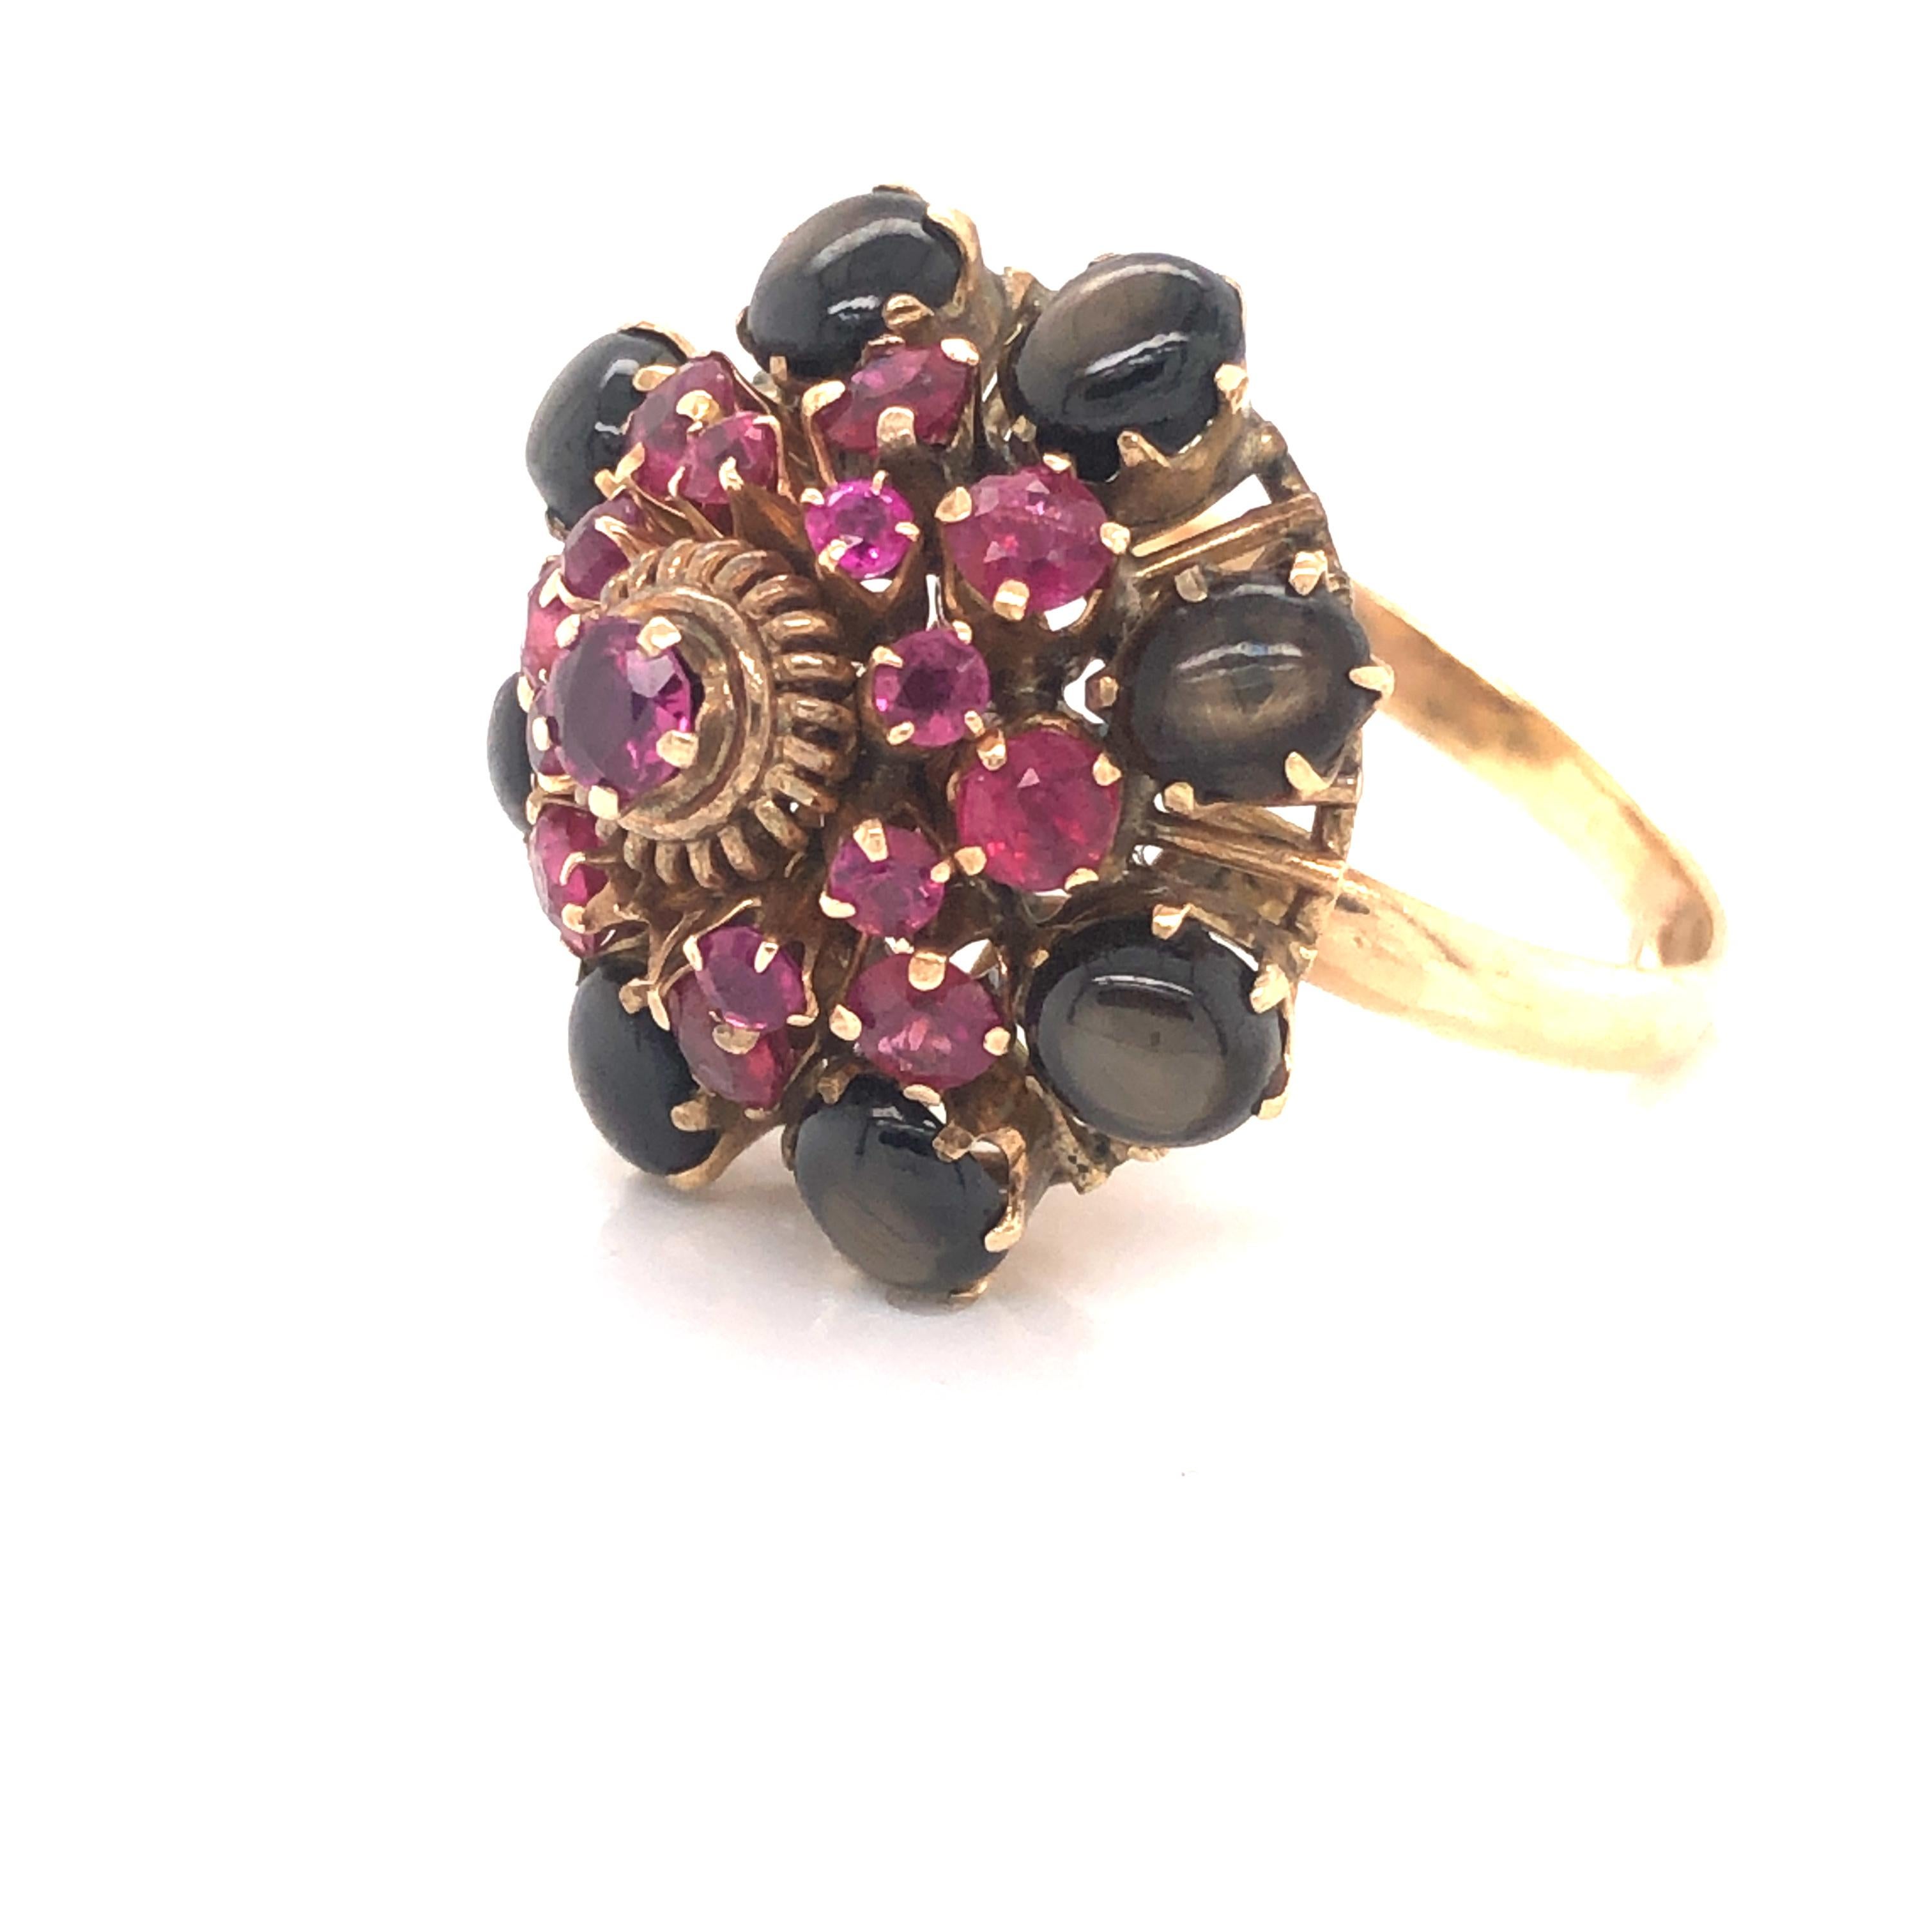 Fantastic design on this vintage 18k yellow gold ring. The ring is highlighted with natural black star sapphire and ruby gemstones. The base of the design is set with eight black star sapphire cabochon gemstones.  All gemstones show a sharp star